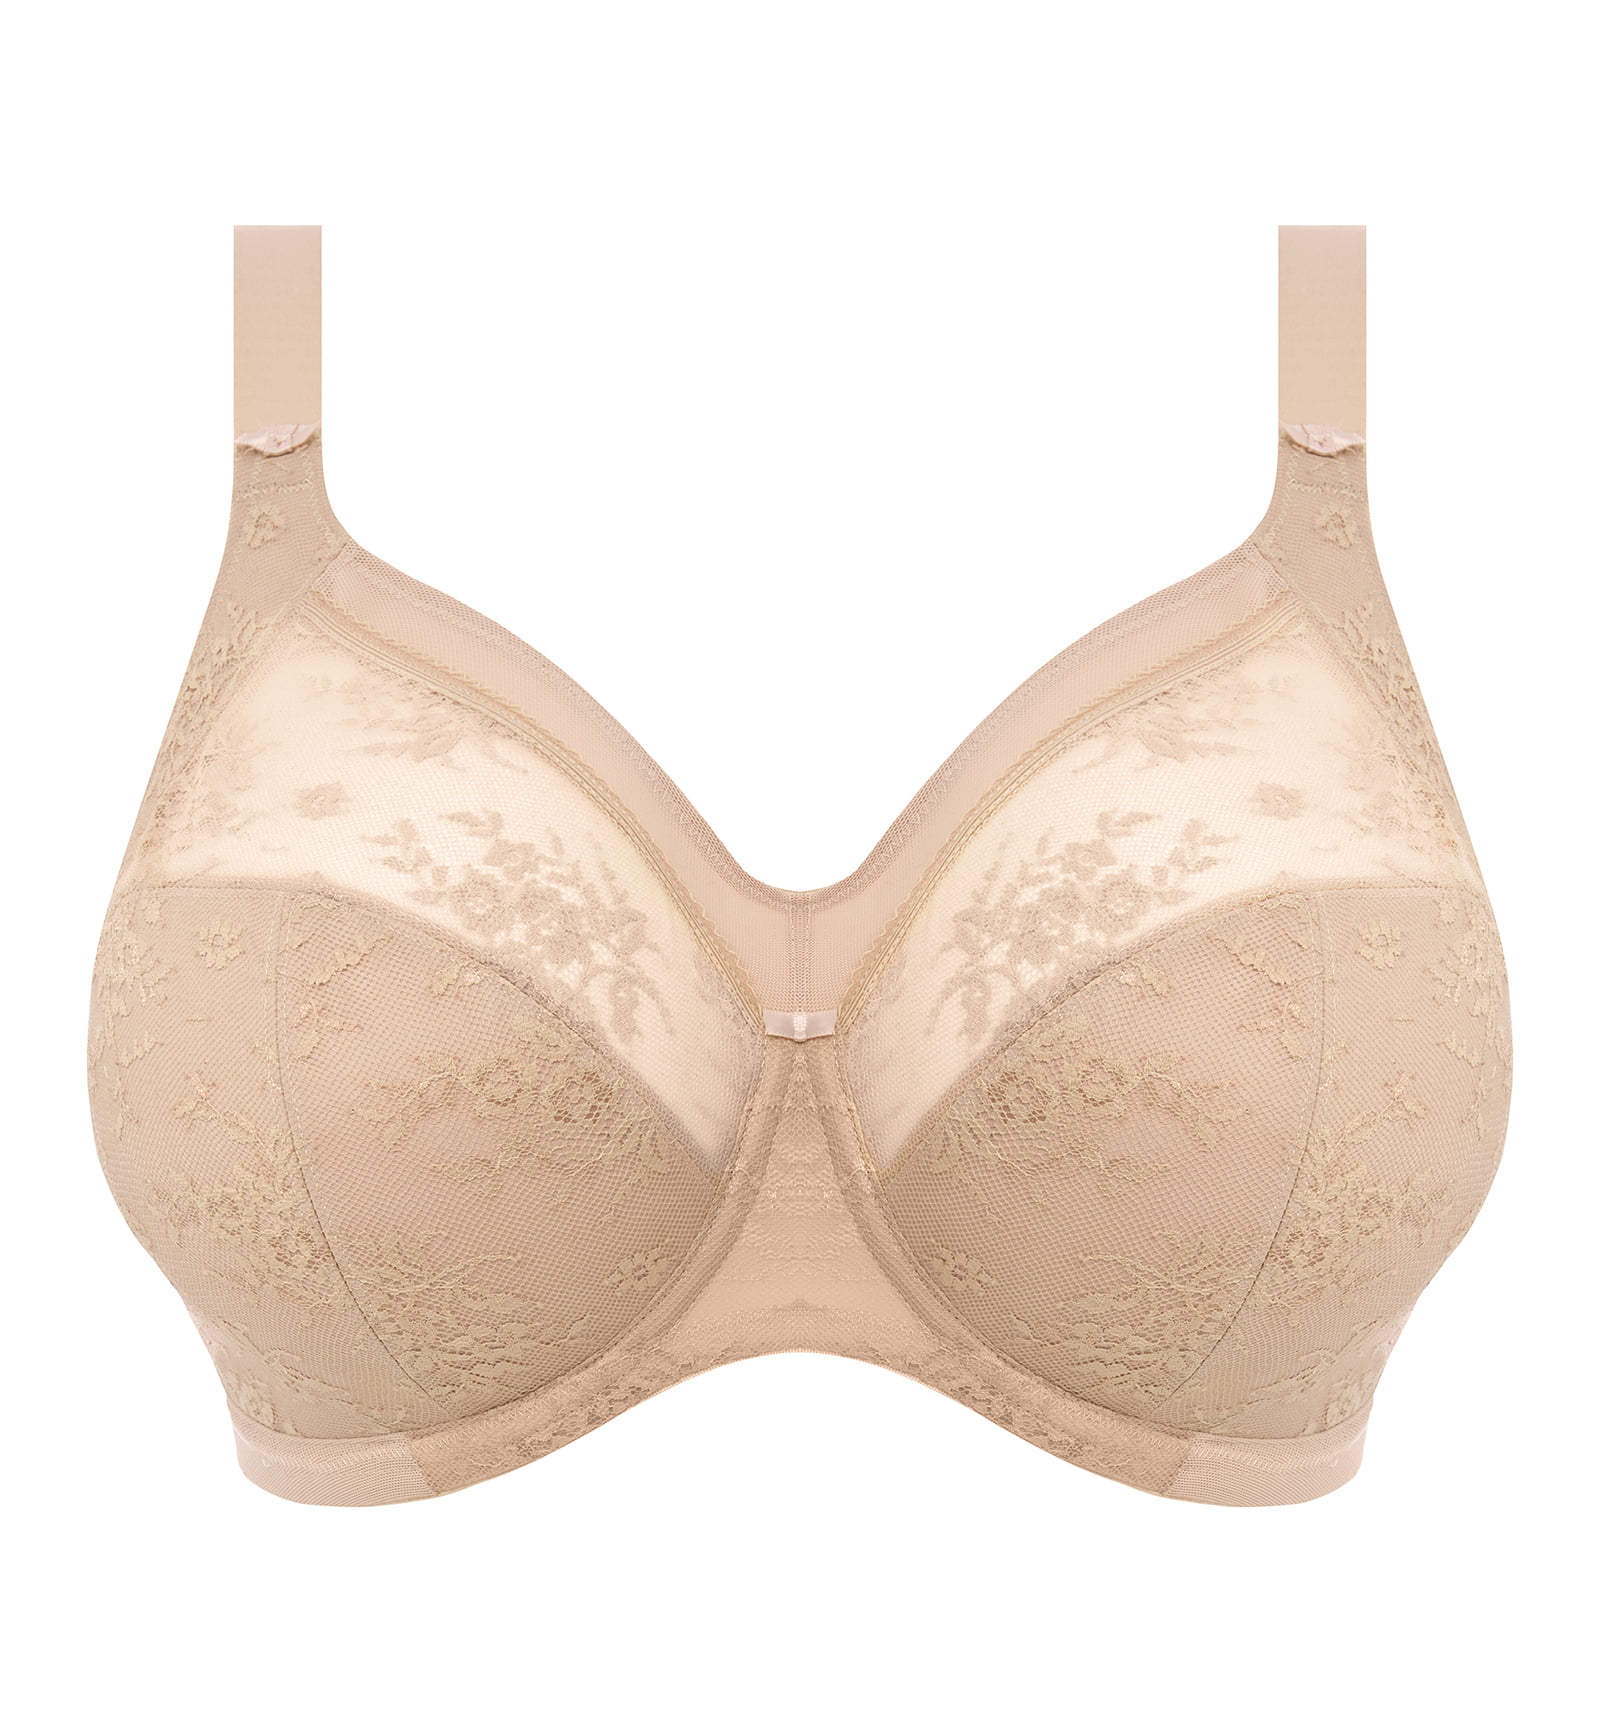 Goddess Verity Full Cup Underwire Bra (700204),44H,Fawn